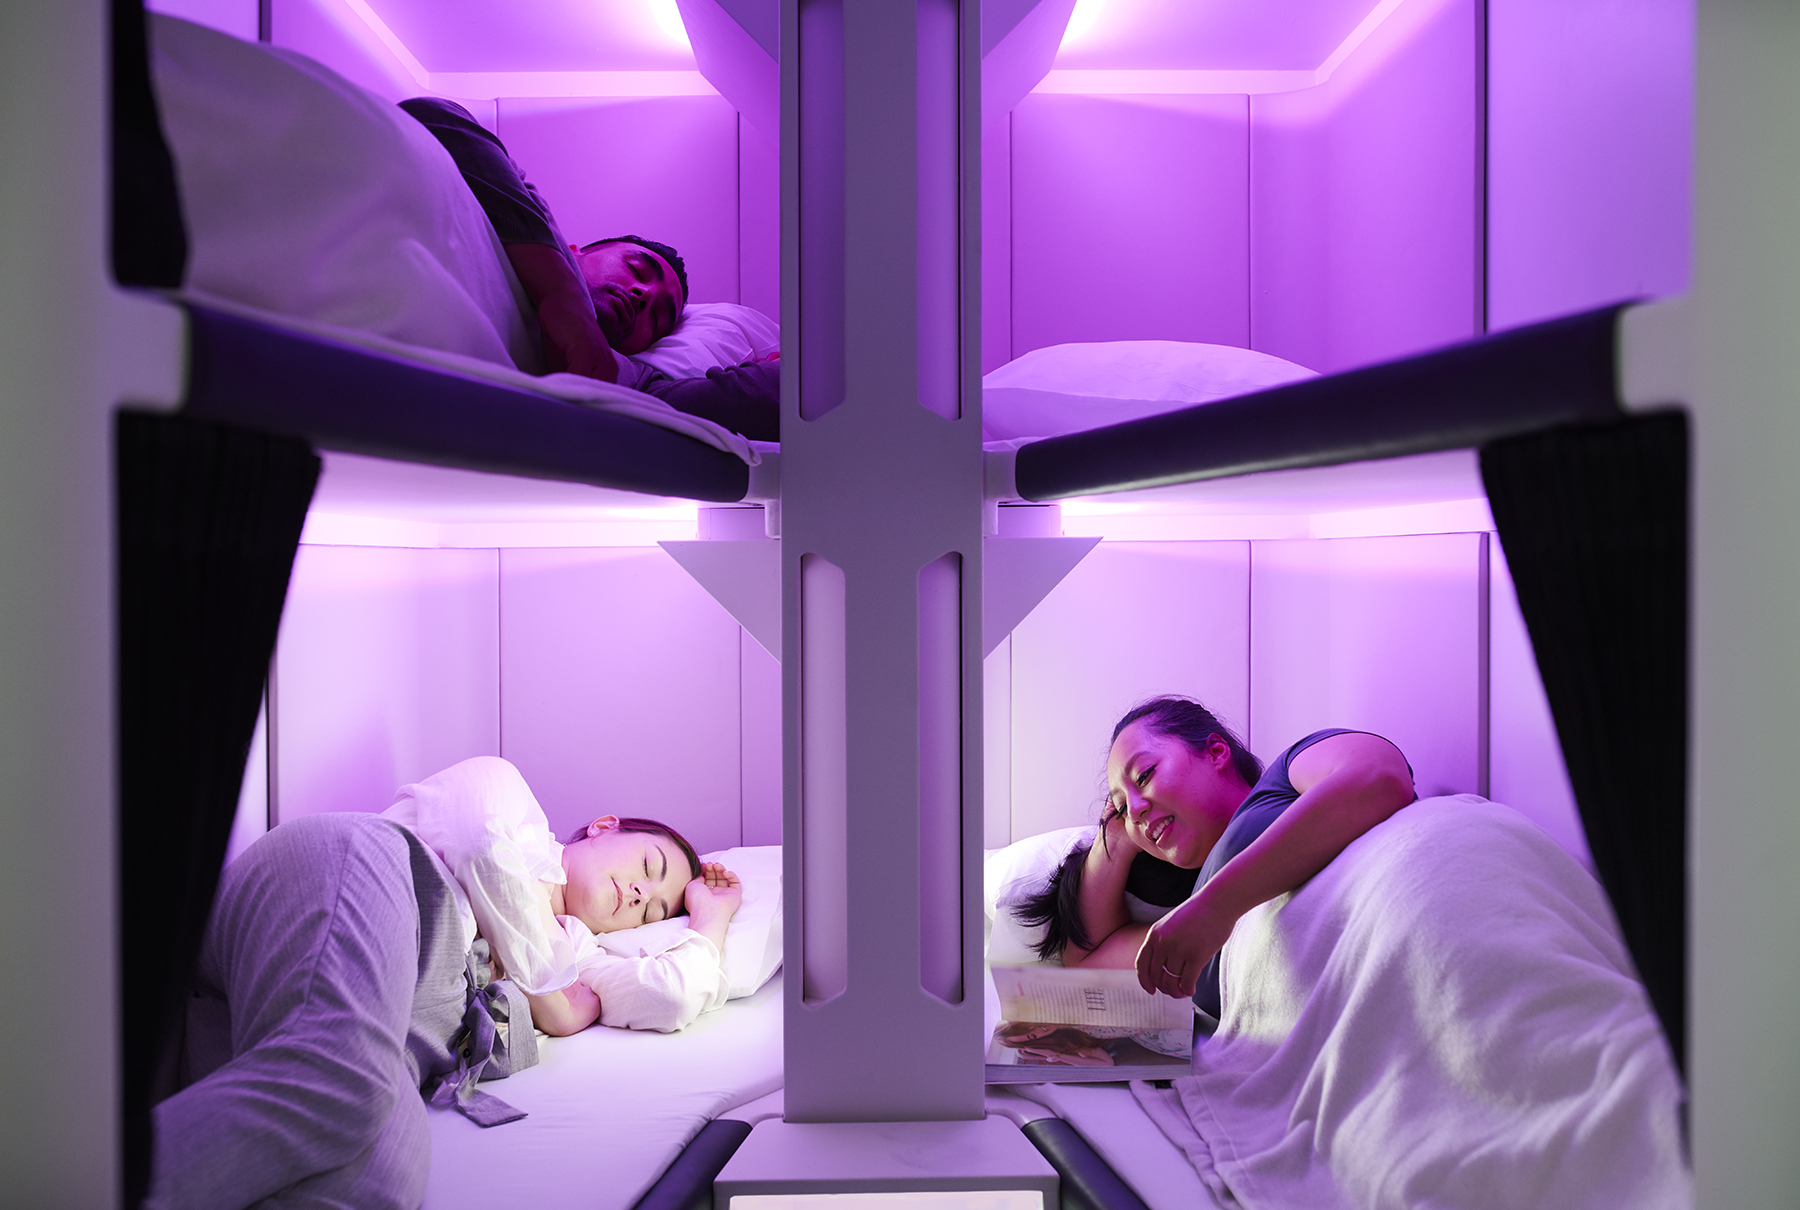 Air New Zealand tells us more about their comfortable bunk beds